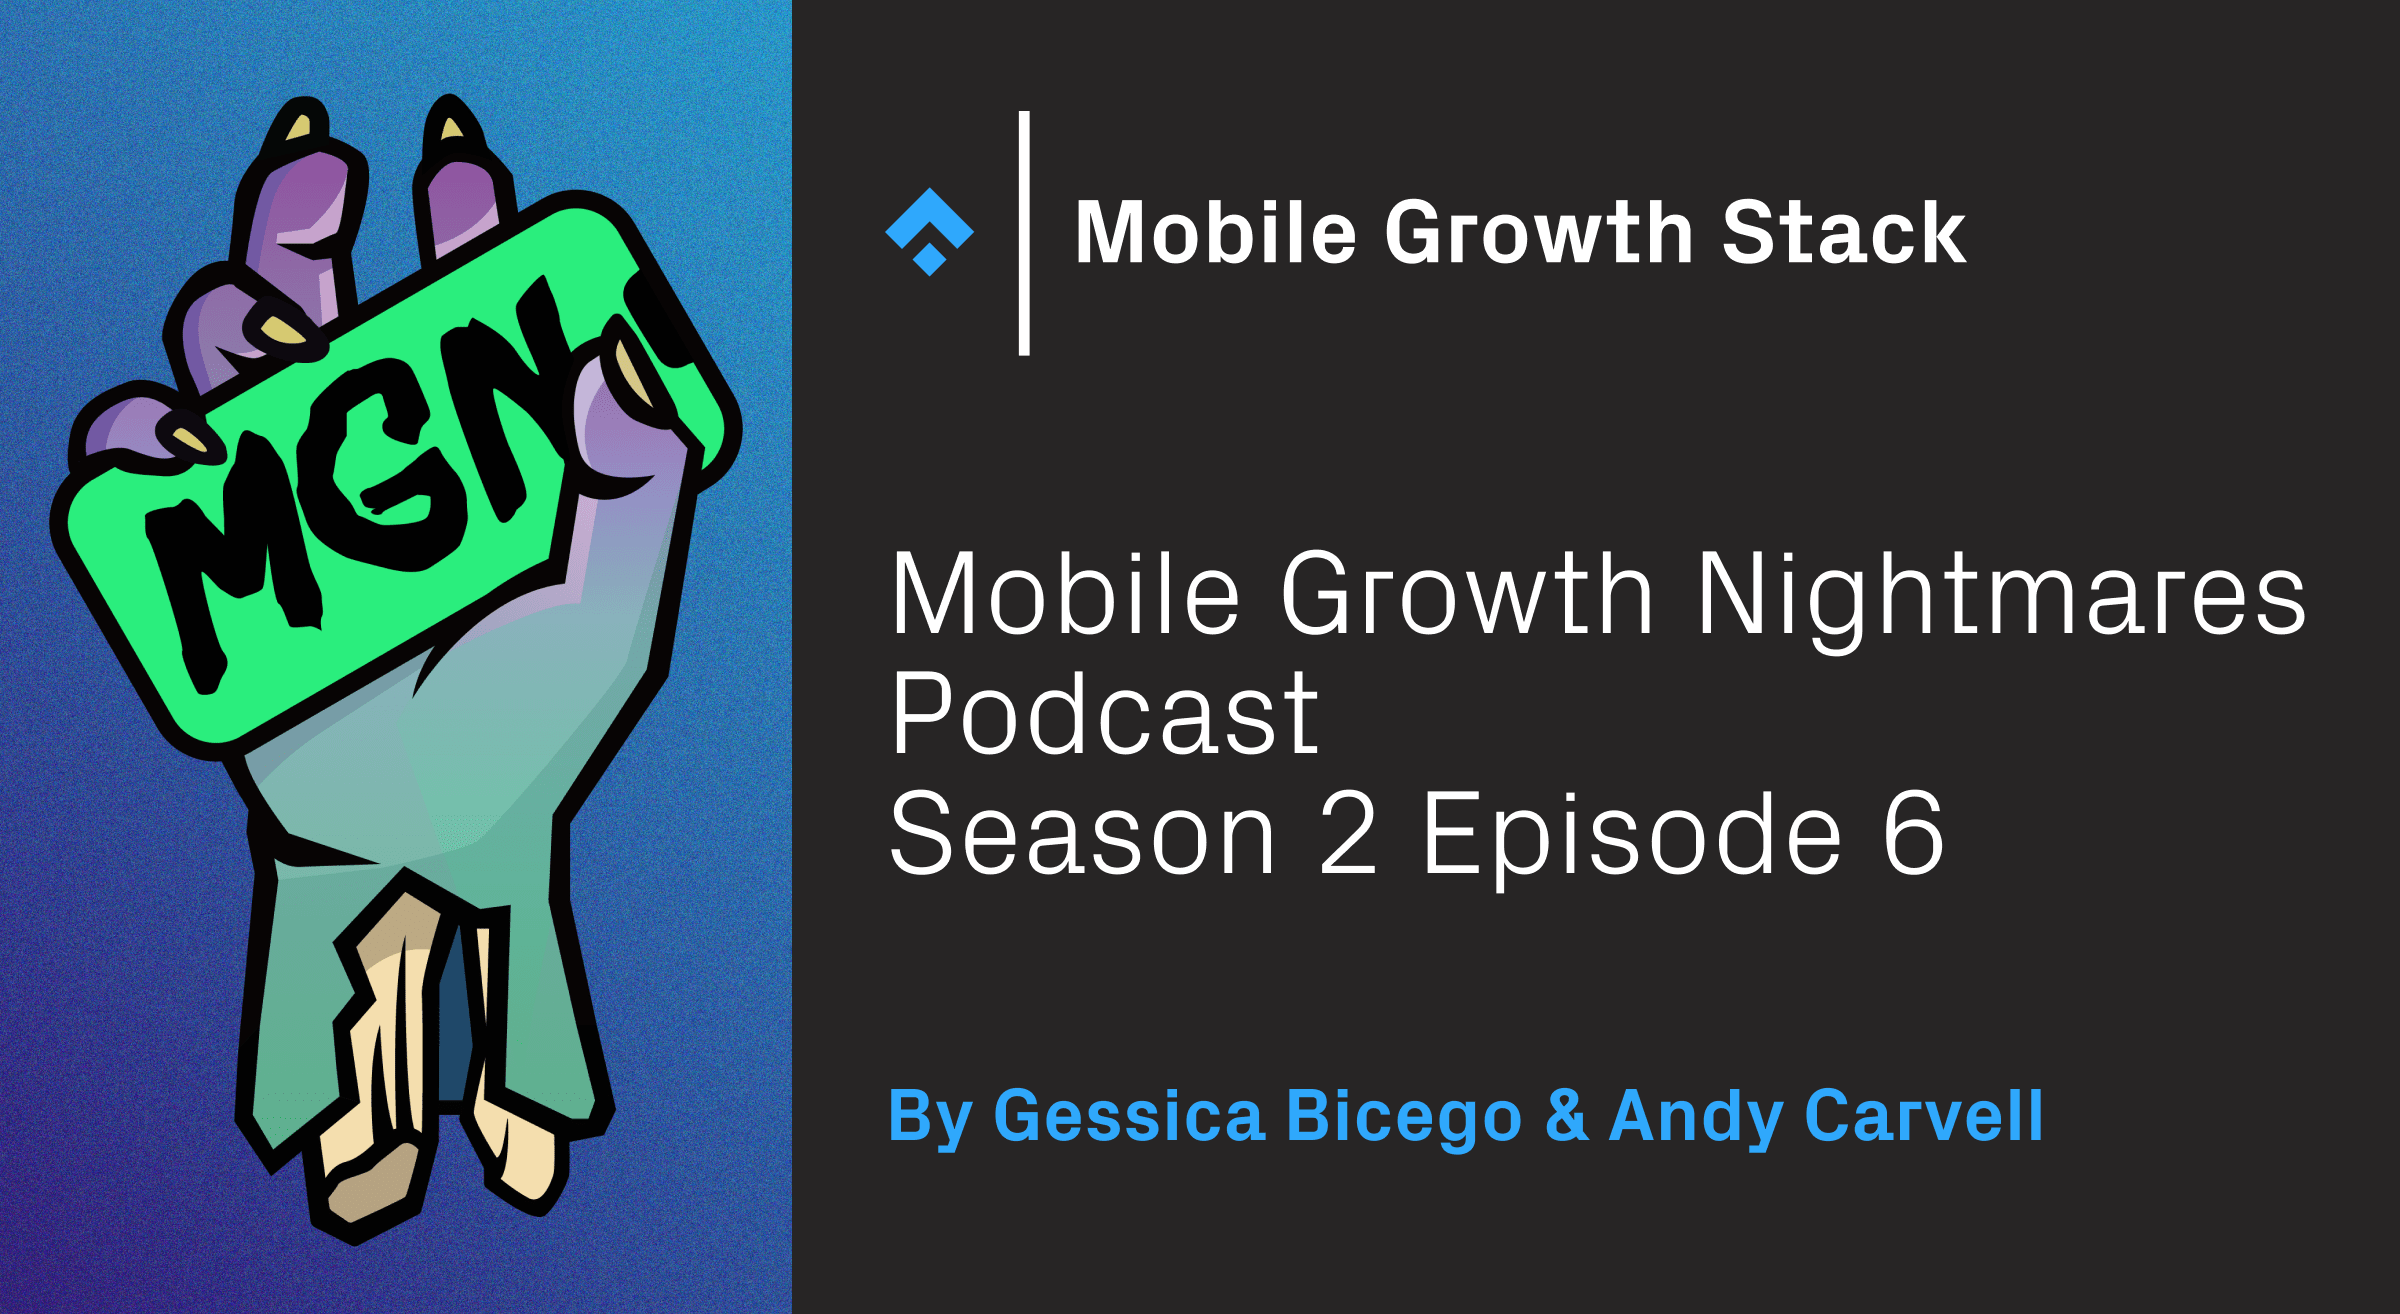 Mobile growth nightmares